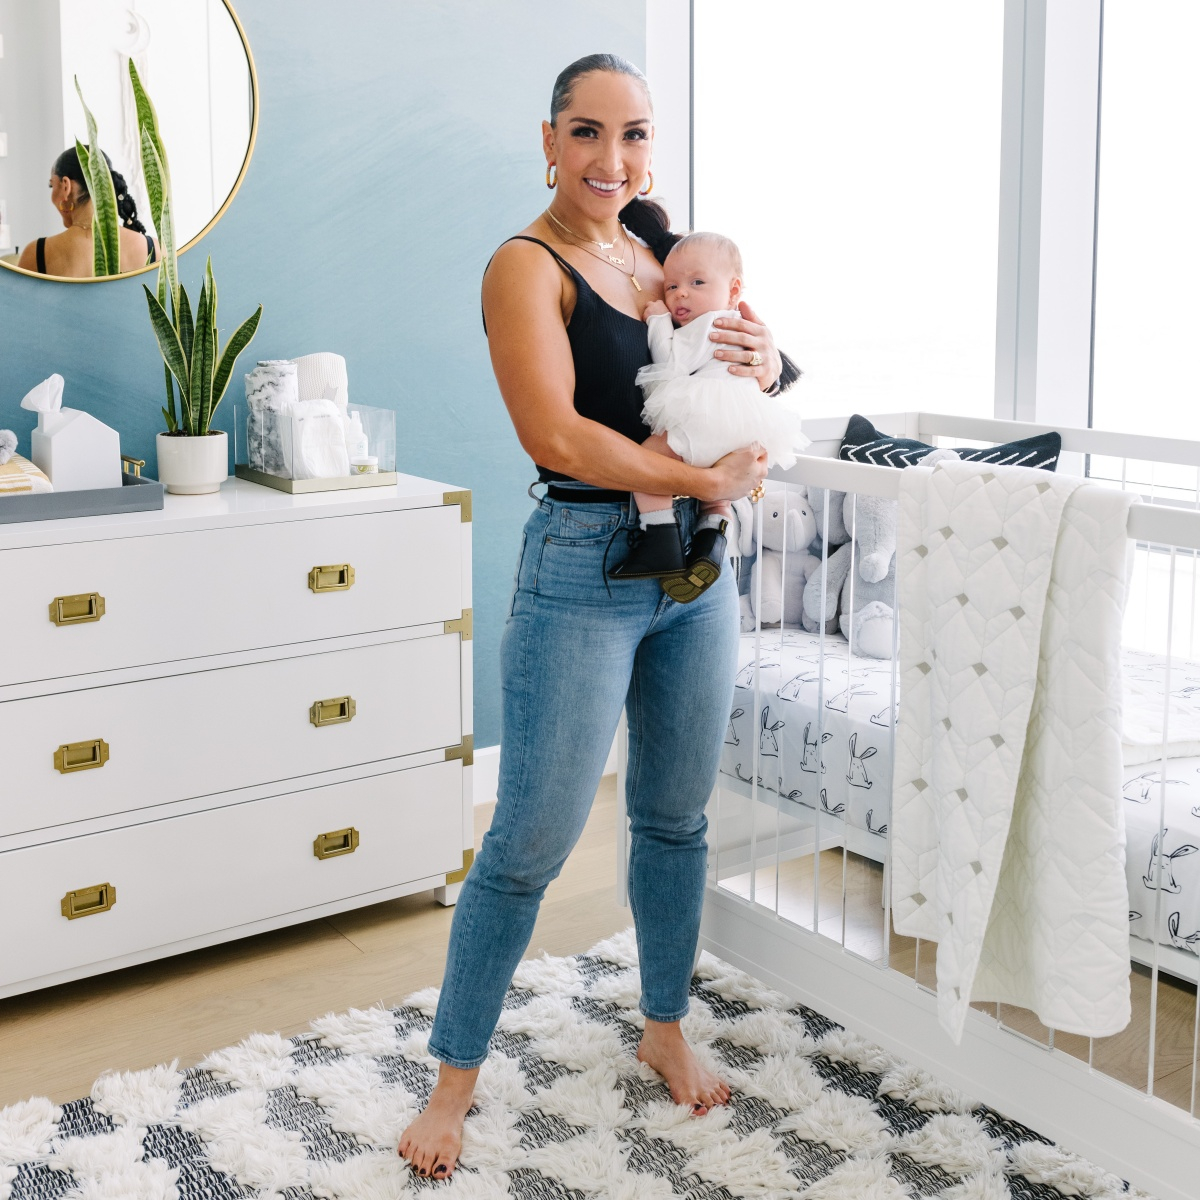 Peloton's Robin Arzón on Her Second Baby and Her New Book